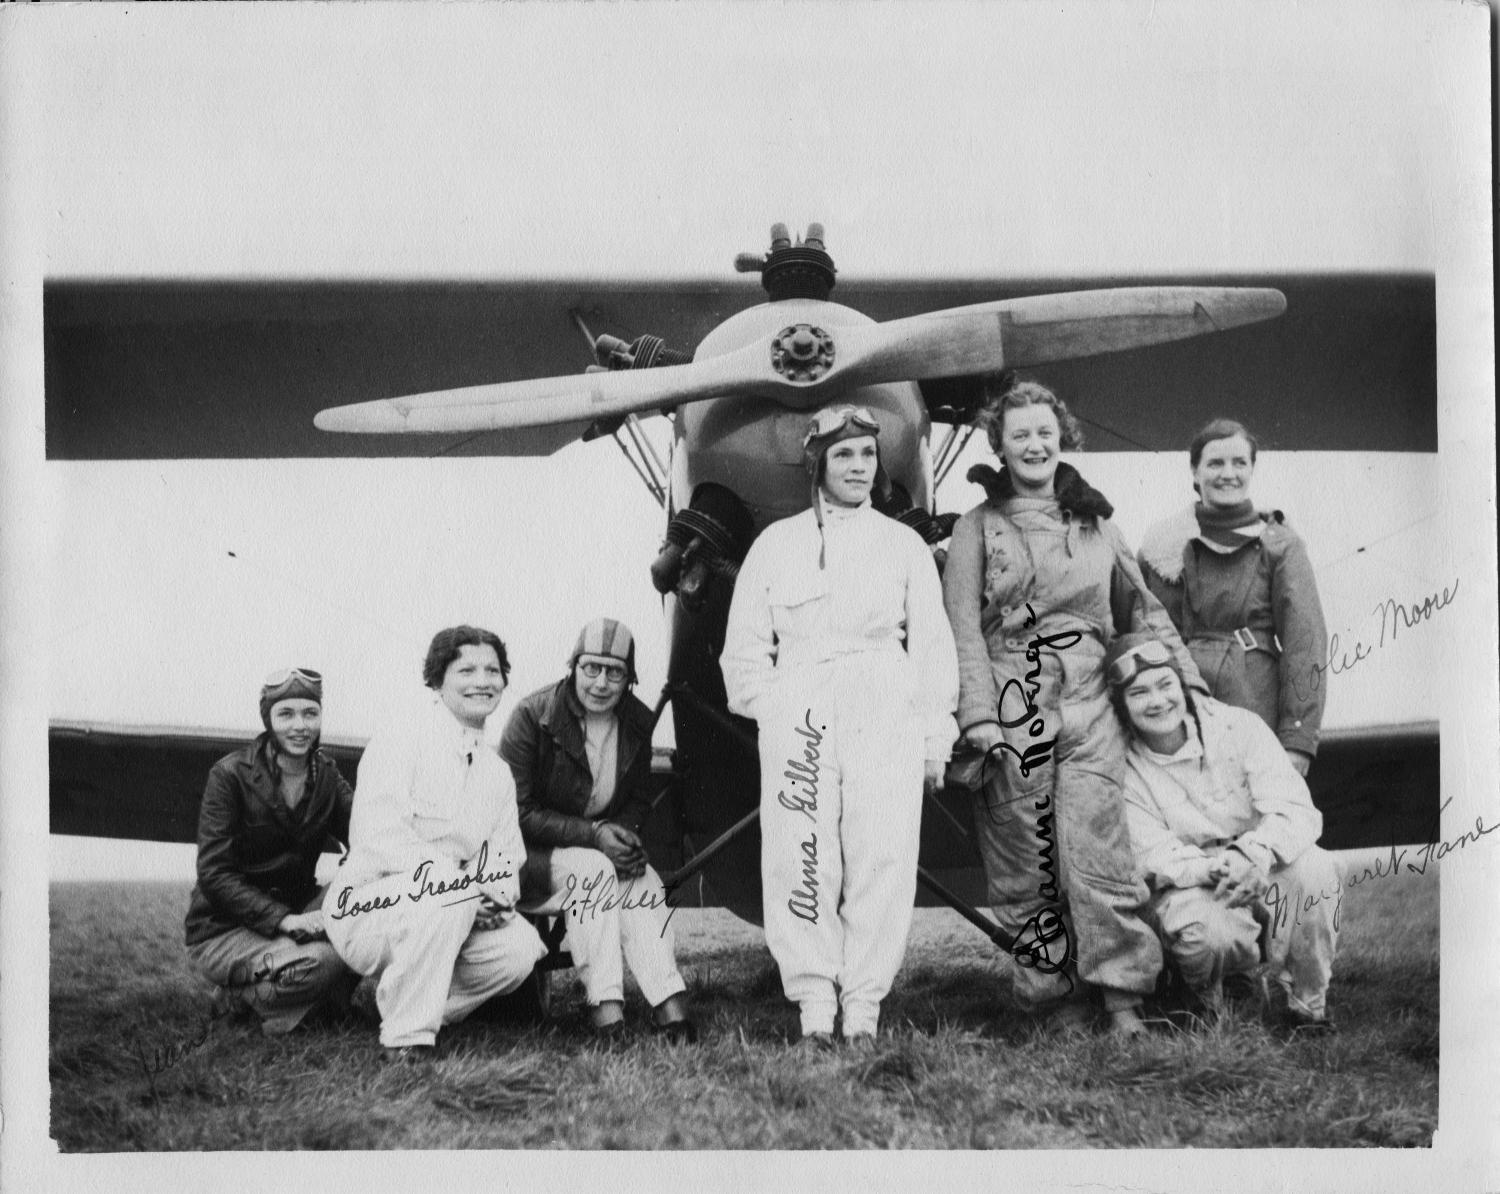 Autographed photograph showing Canada's first women pilot's club, The Flying Seven, at Sea Island Airport.